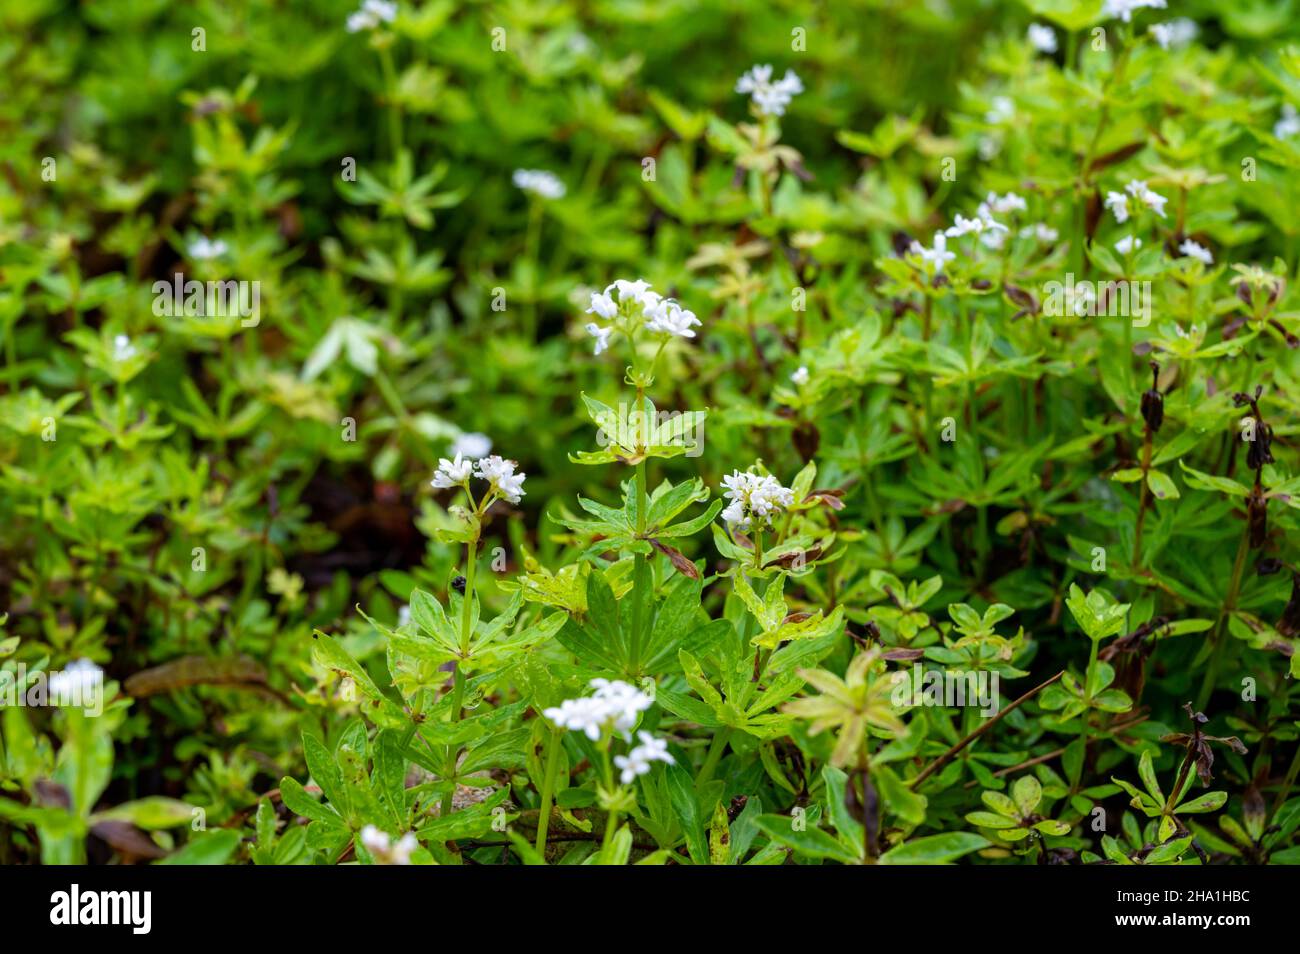 Botanical collection, asperula odorata or bedstraw flowering plant in summer Stock Photo